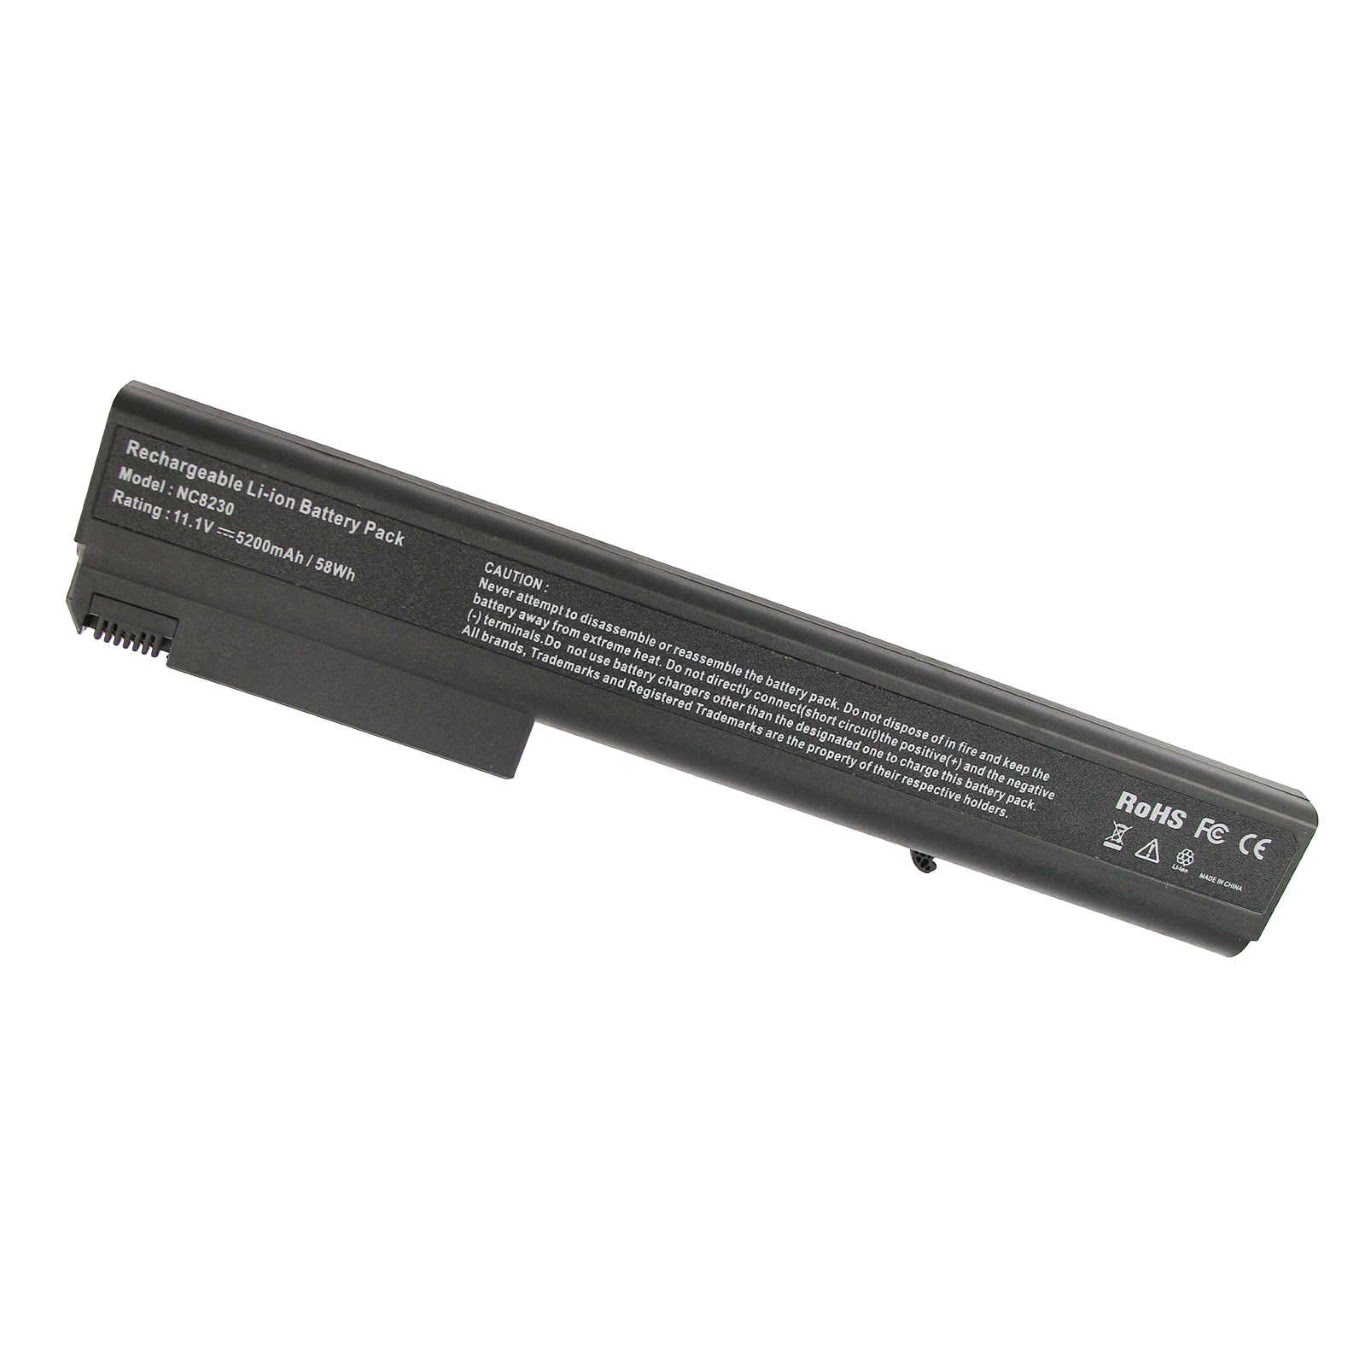 Hp 361909-001, Hstnn-c13c Laptop Battery For Nw8440, Business Notebook Nx8220 replacement